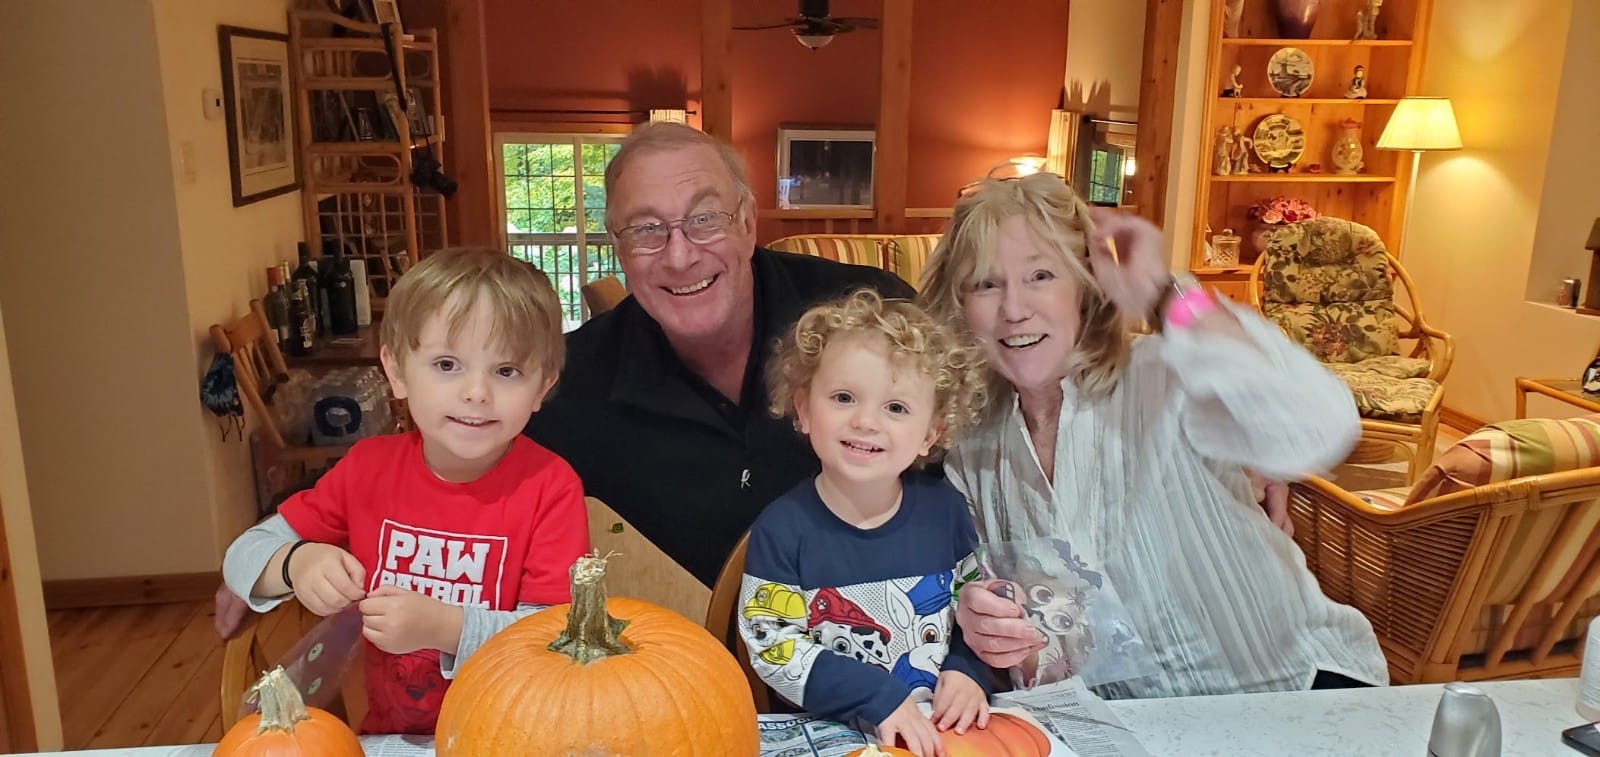 Wendy and her husband carve pumpkins with her two adorable grandkids